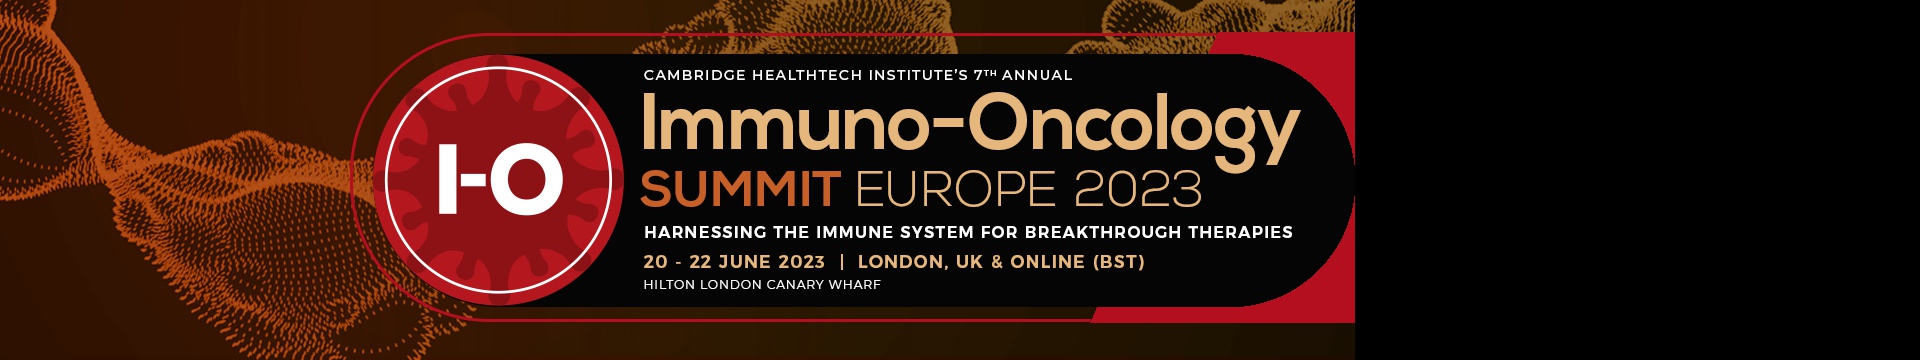 7th Annual Immuno-Oncology Summit Europe